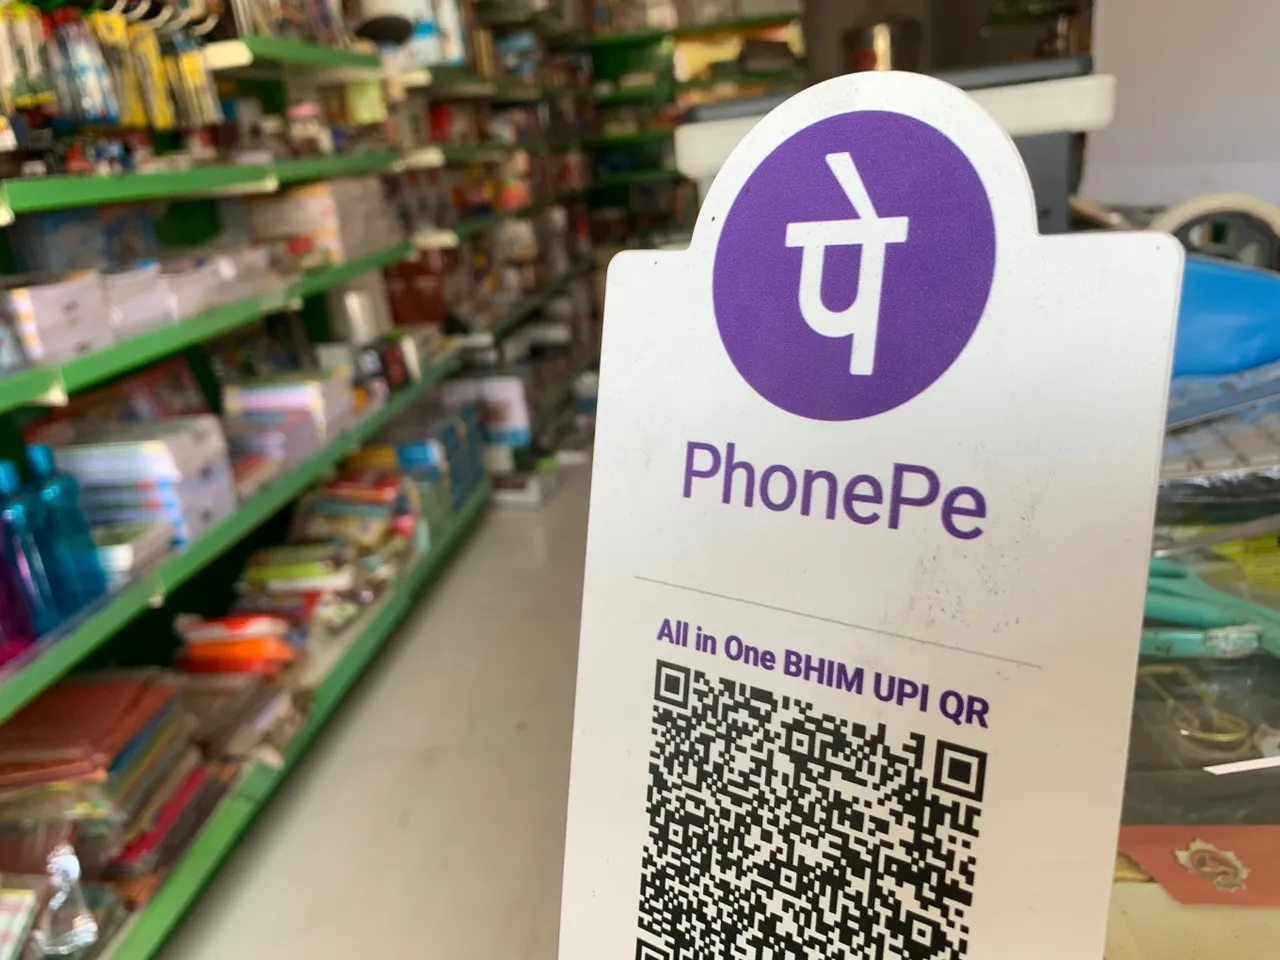 PhonePe raises USD 350 mn at USD 12 bn valuation